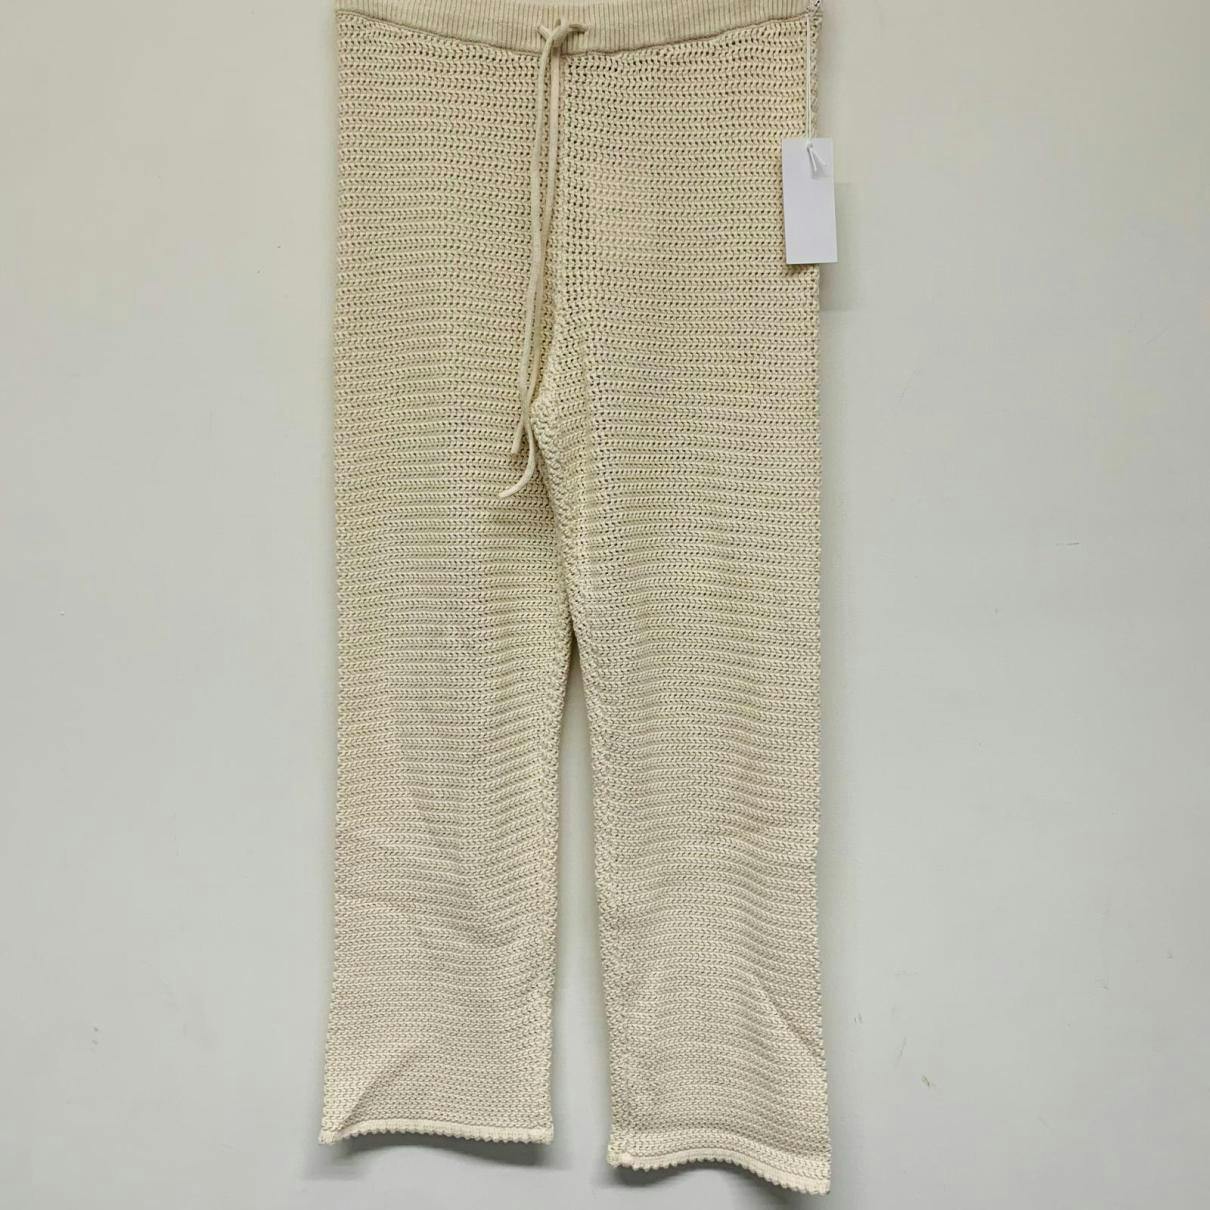 https://images.vestiairecollective.com/cdn-cgi/image/q=75,f=auto,/produit/white-synthetic-reformation-trousers-35136158-12_2.jpg?secret=VC-e9eee96a-a819-4431-ad12-d066be2626ef